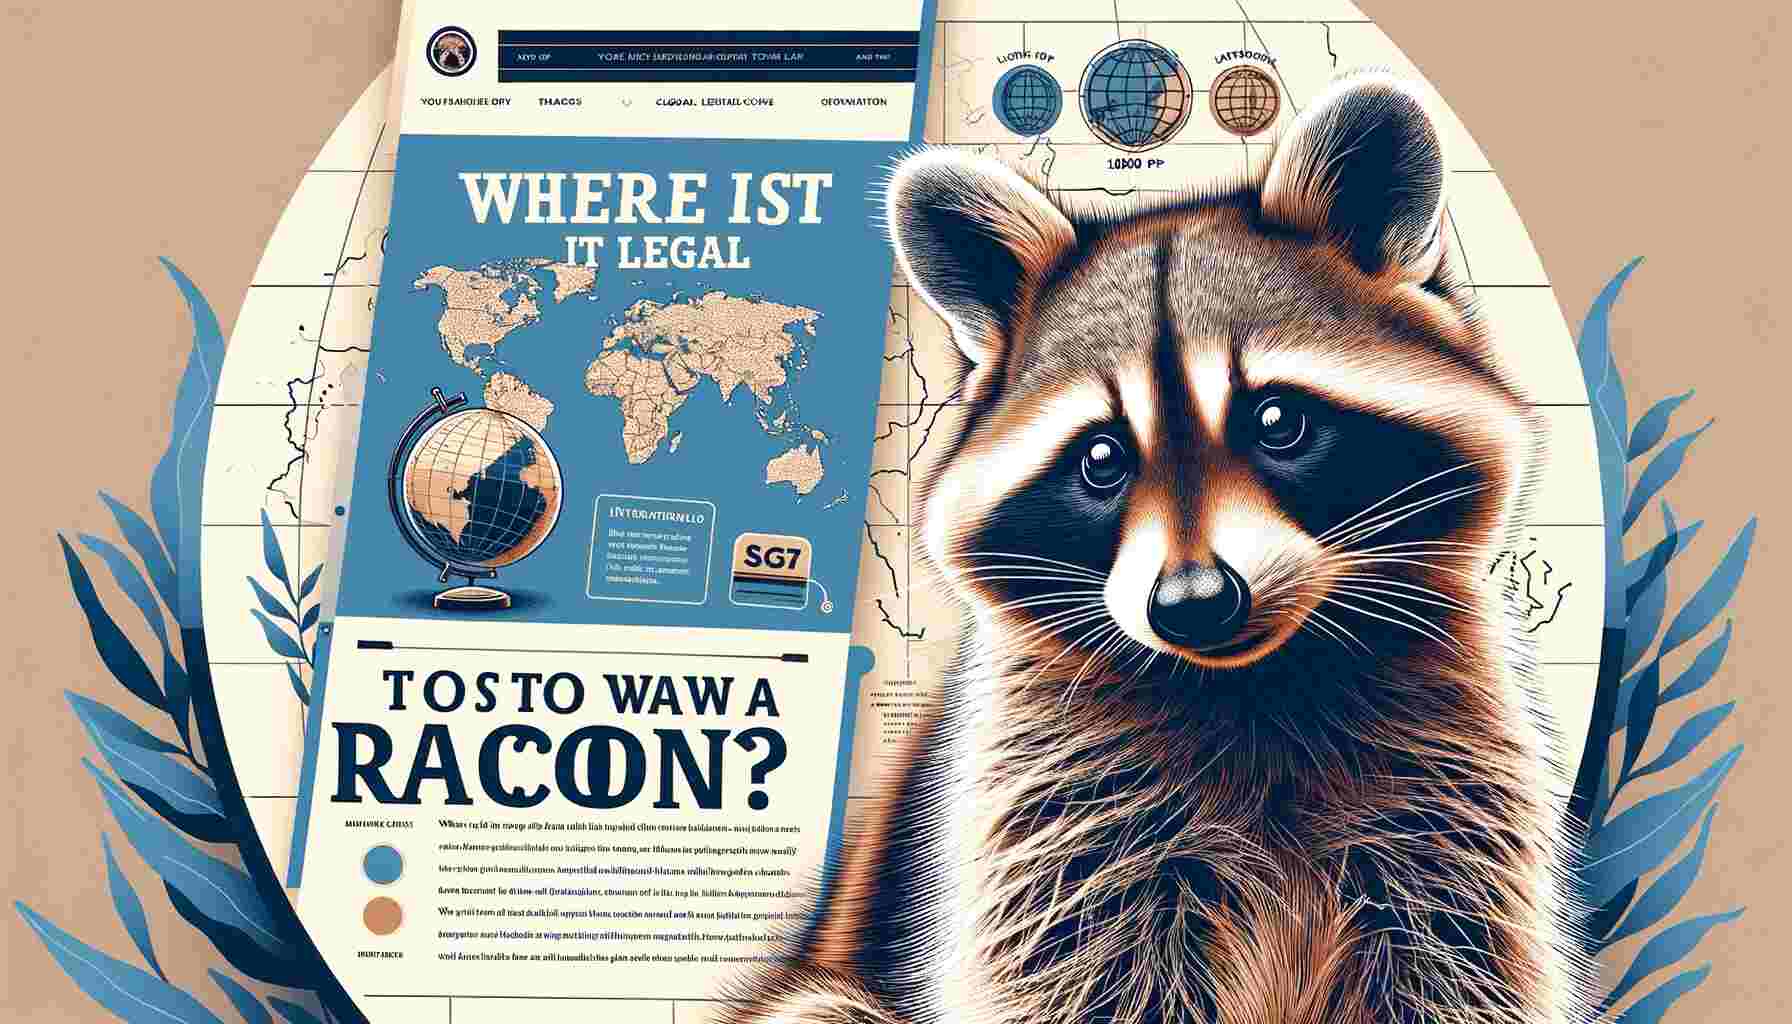 The image features a stylized graphic design as a featured image for an article. At the top, it reads "Where is it Legal to Own a Raccoon?" in a decorative font. Below the title is a detailed illustration of a raccoon's face, with its distinctive black mask and ringed tail. The background consists of a faded blue world map and some abstract design elements, suggesting a global context for the article's topic. To the left, there's a partial image of a globe on a stand, reinforcing the international angle of the content.